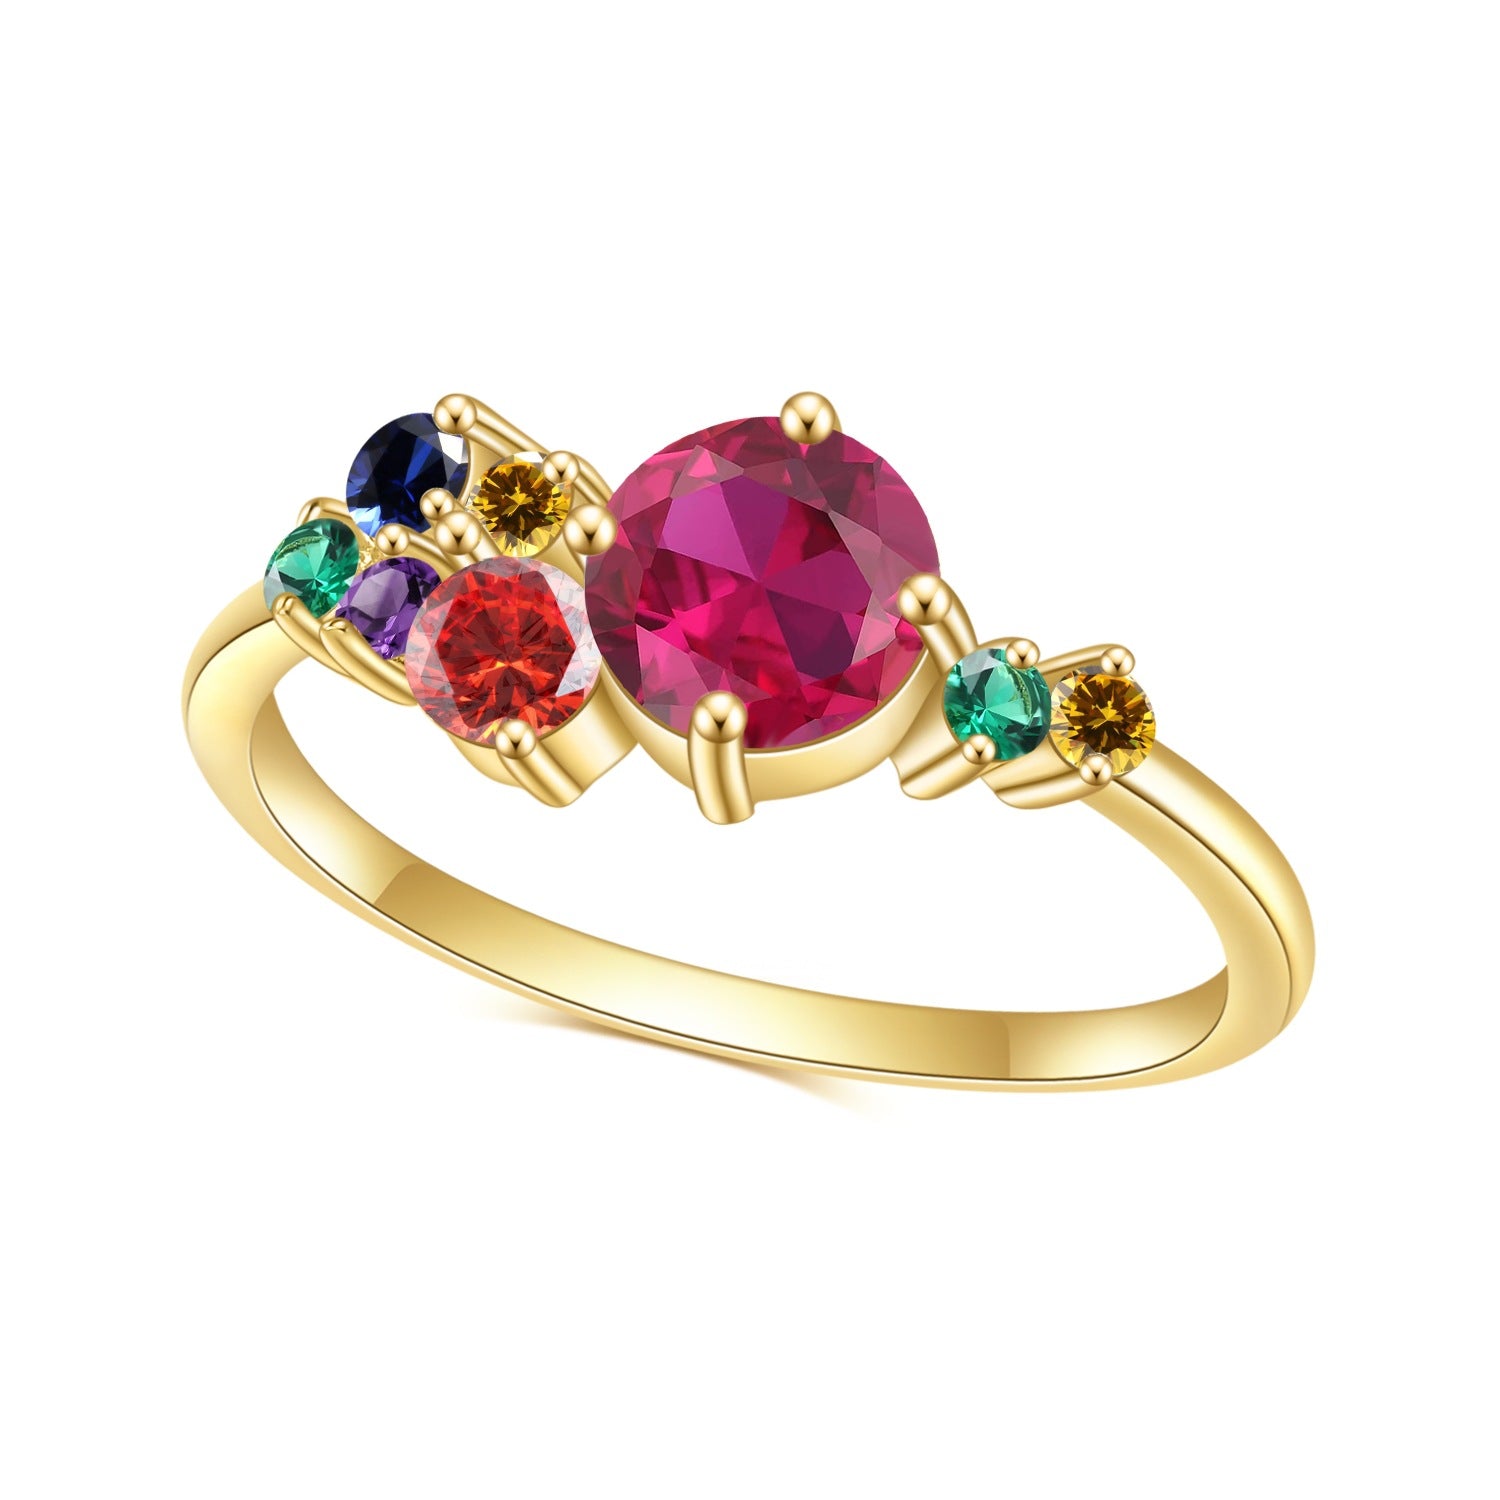 Golden S925 Sterling Silver Plated 18k Gold with Colour Gemstones Ring for Women